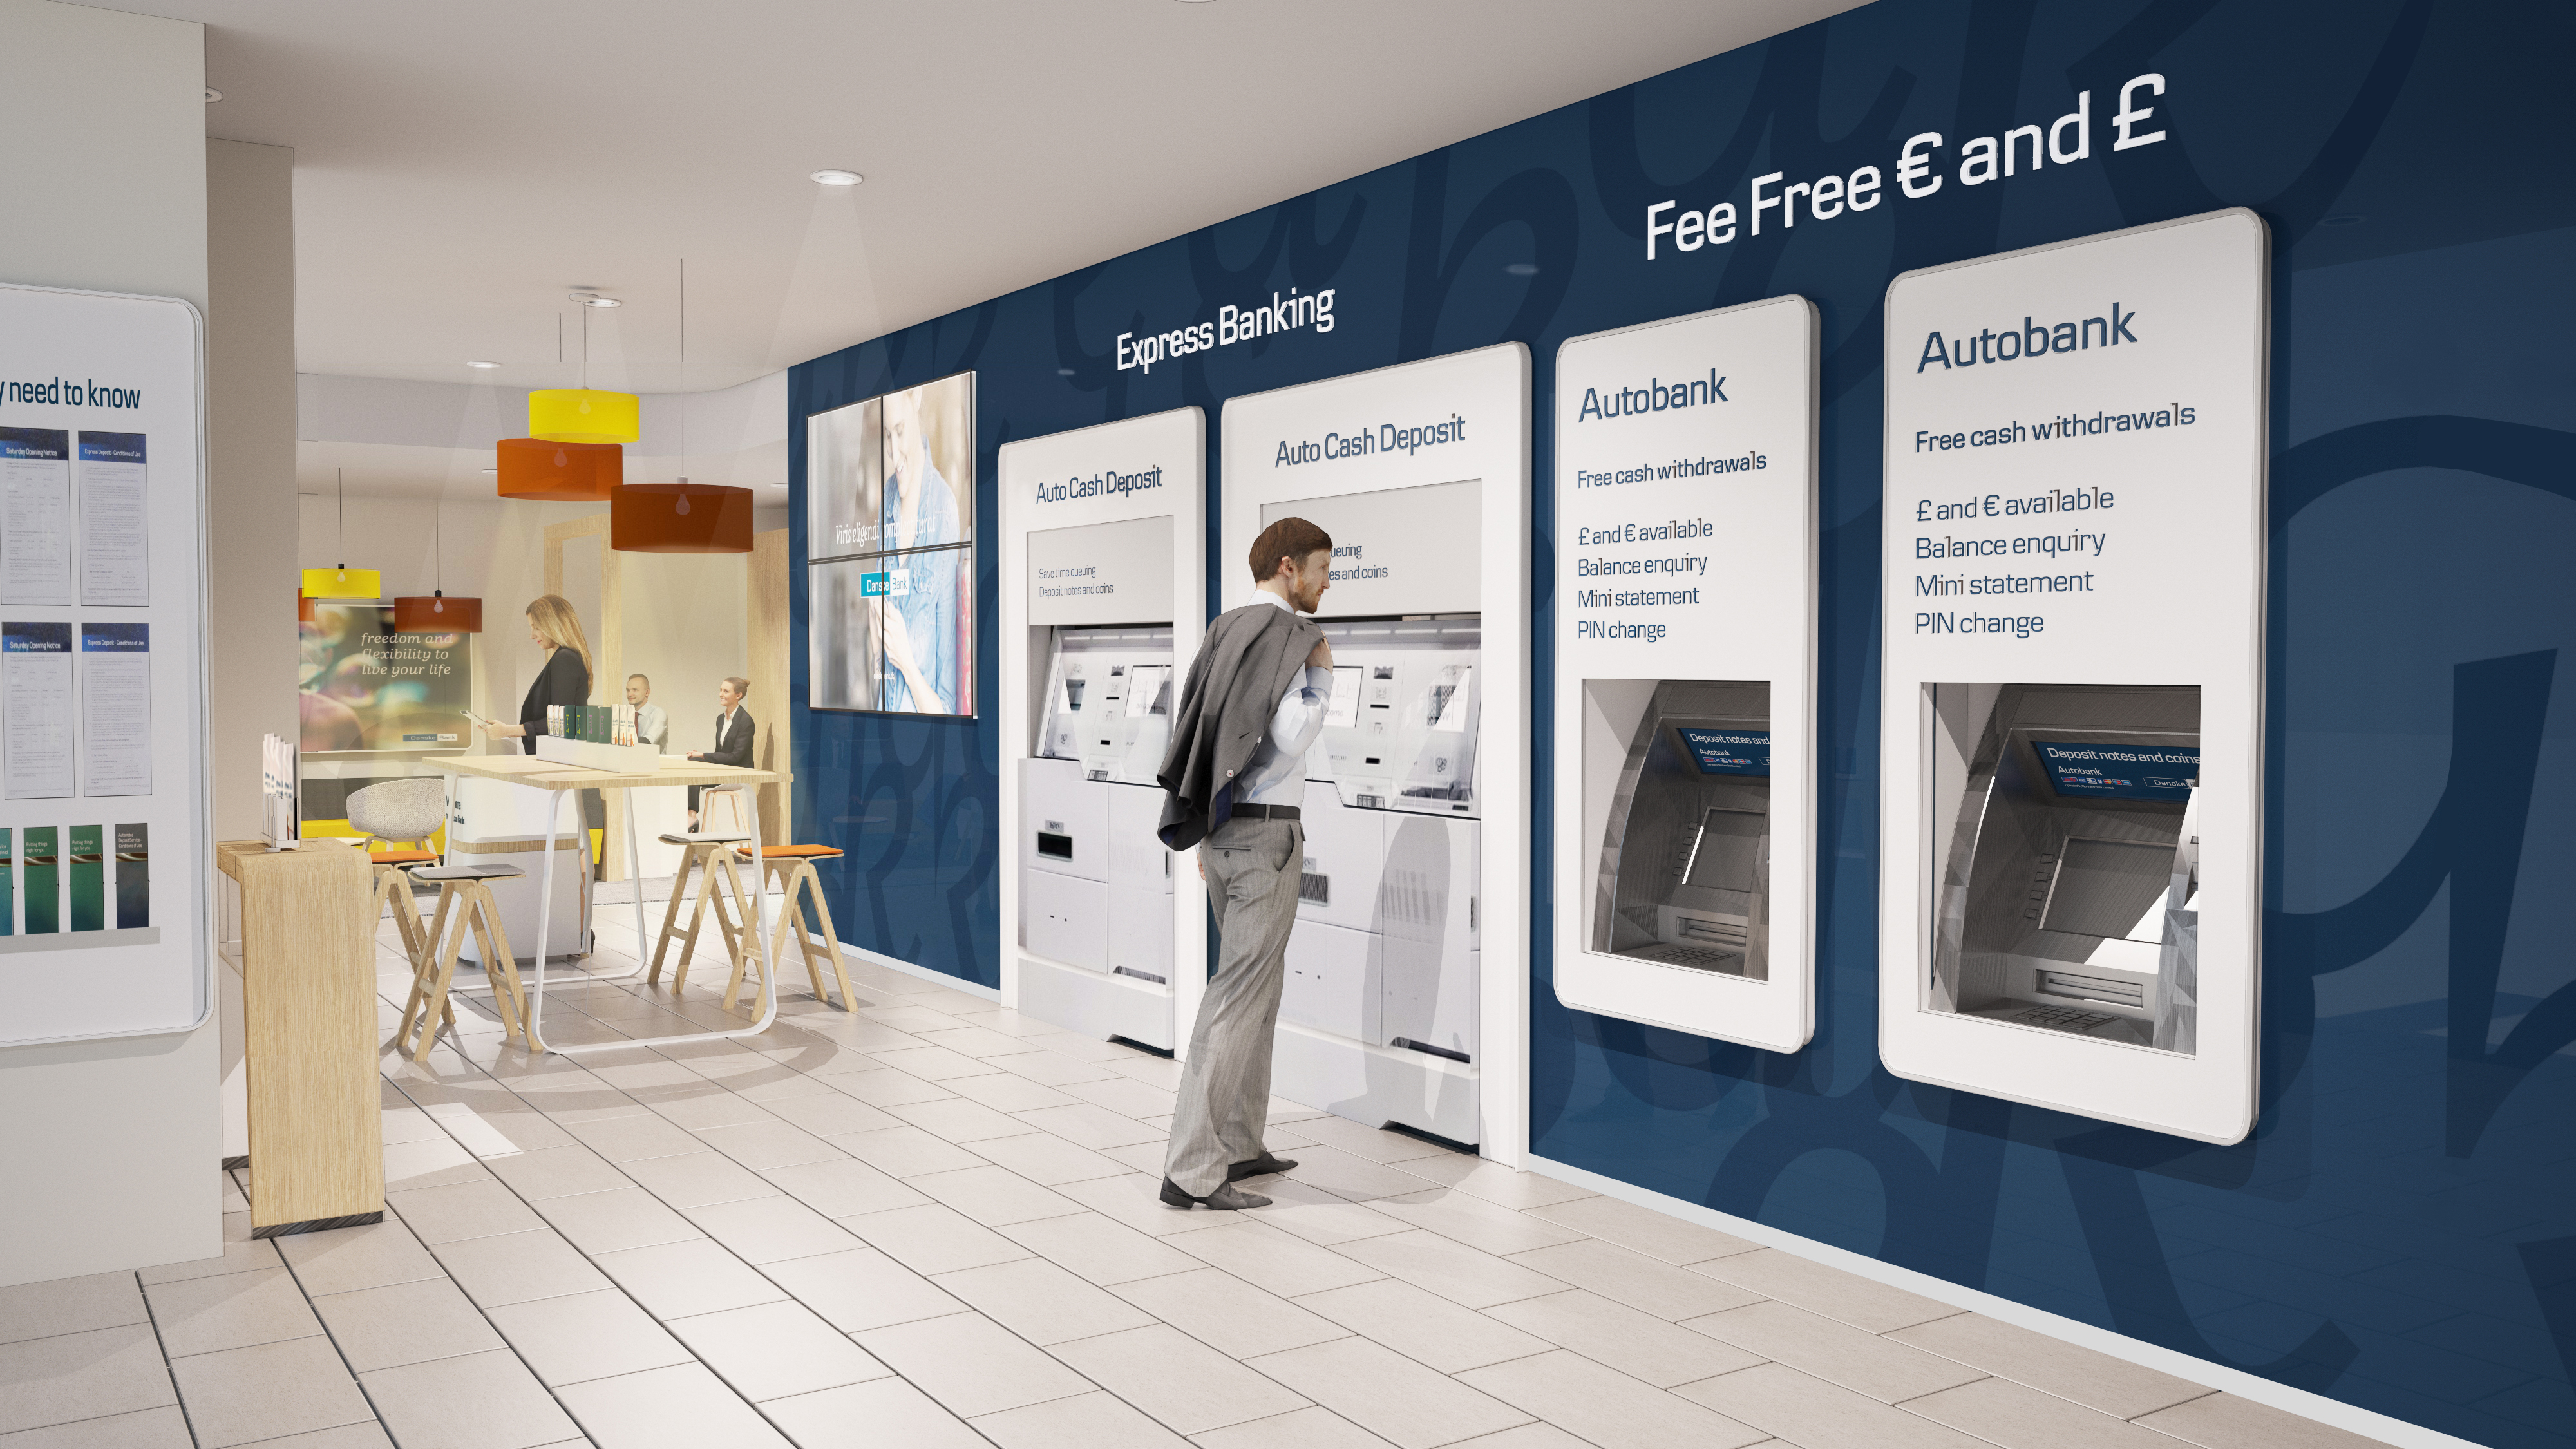 Image shows a mocked up version of the self service wall at the new Danske Bank Bloomfield branch. There is a large navy wall with two express deposit machines and two cash machines that dispense pounds and euros. In the background to the righ is some soft lighting, a high table and high stools and the entrance hall to the branch.